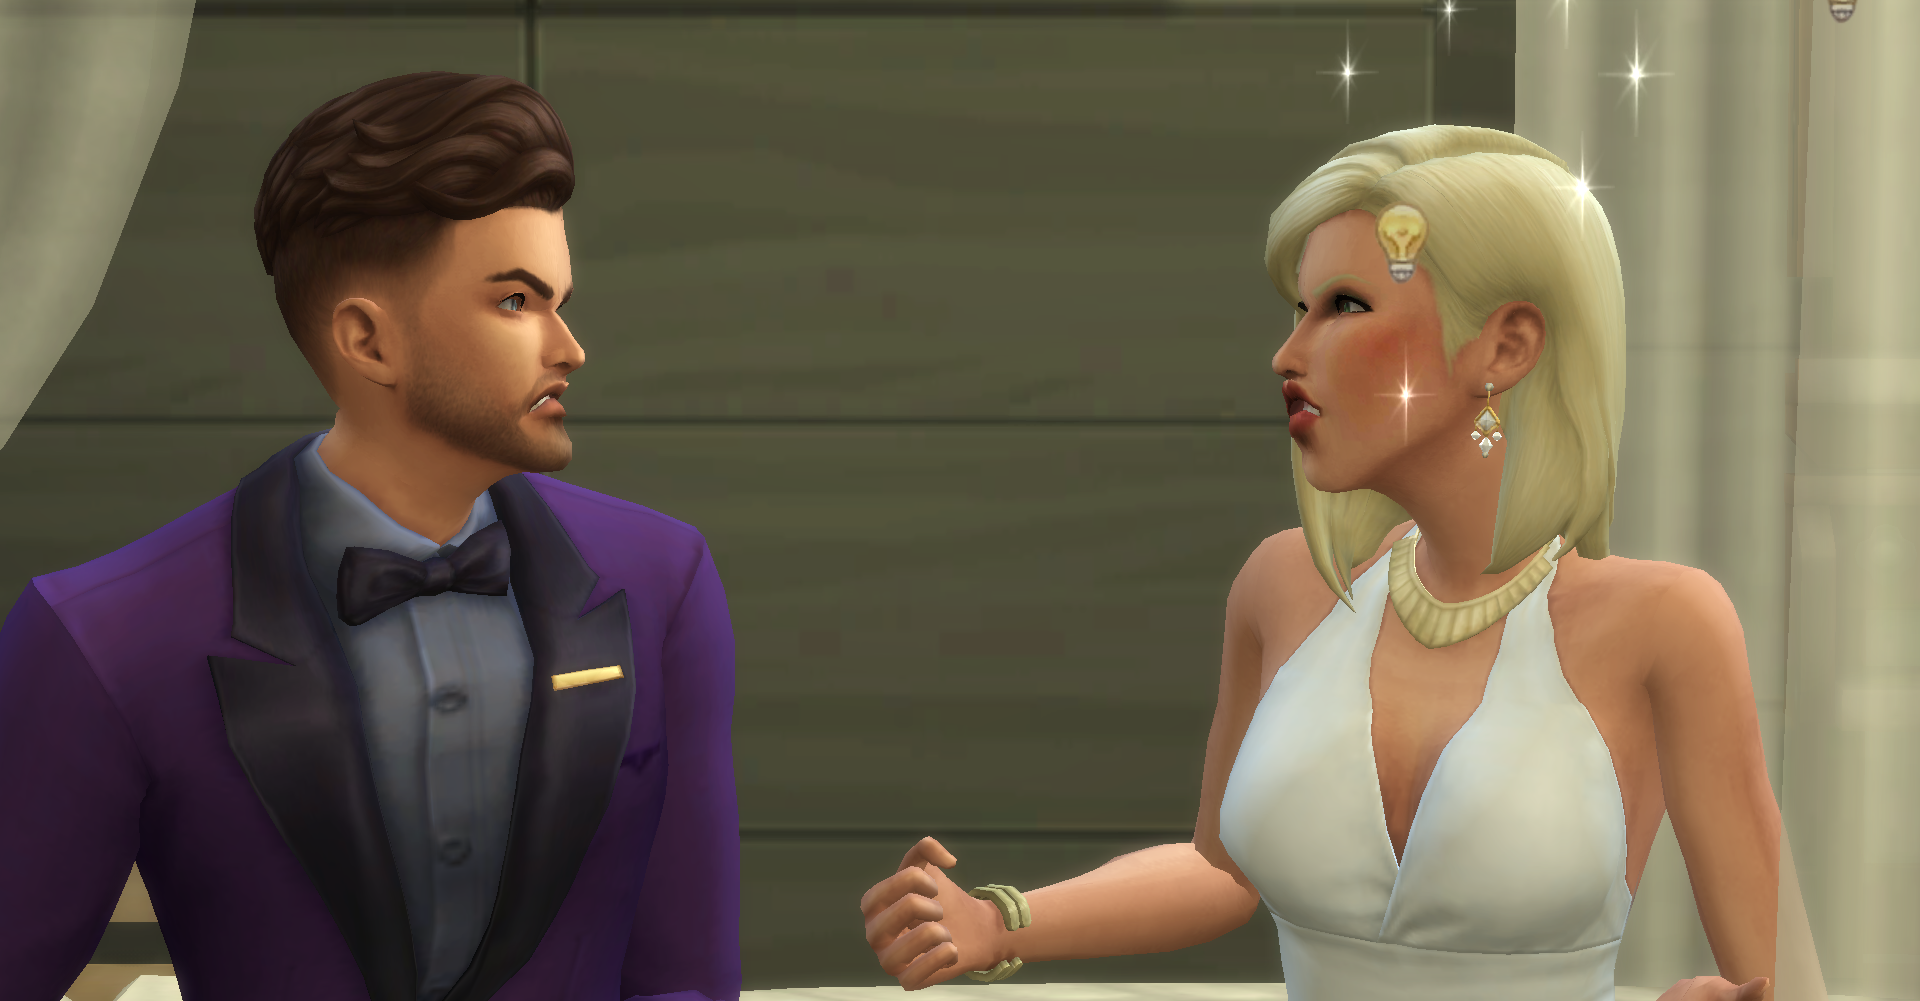 Hot Complications Sims Story Page 5 The Sims 4 General Discussion 